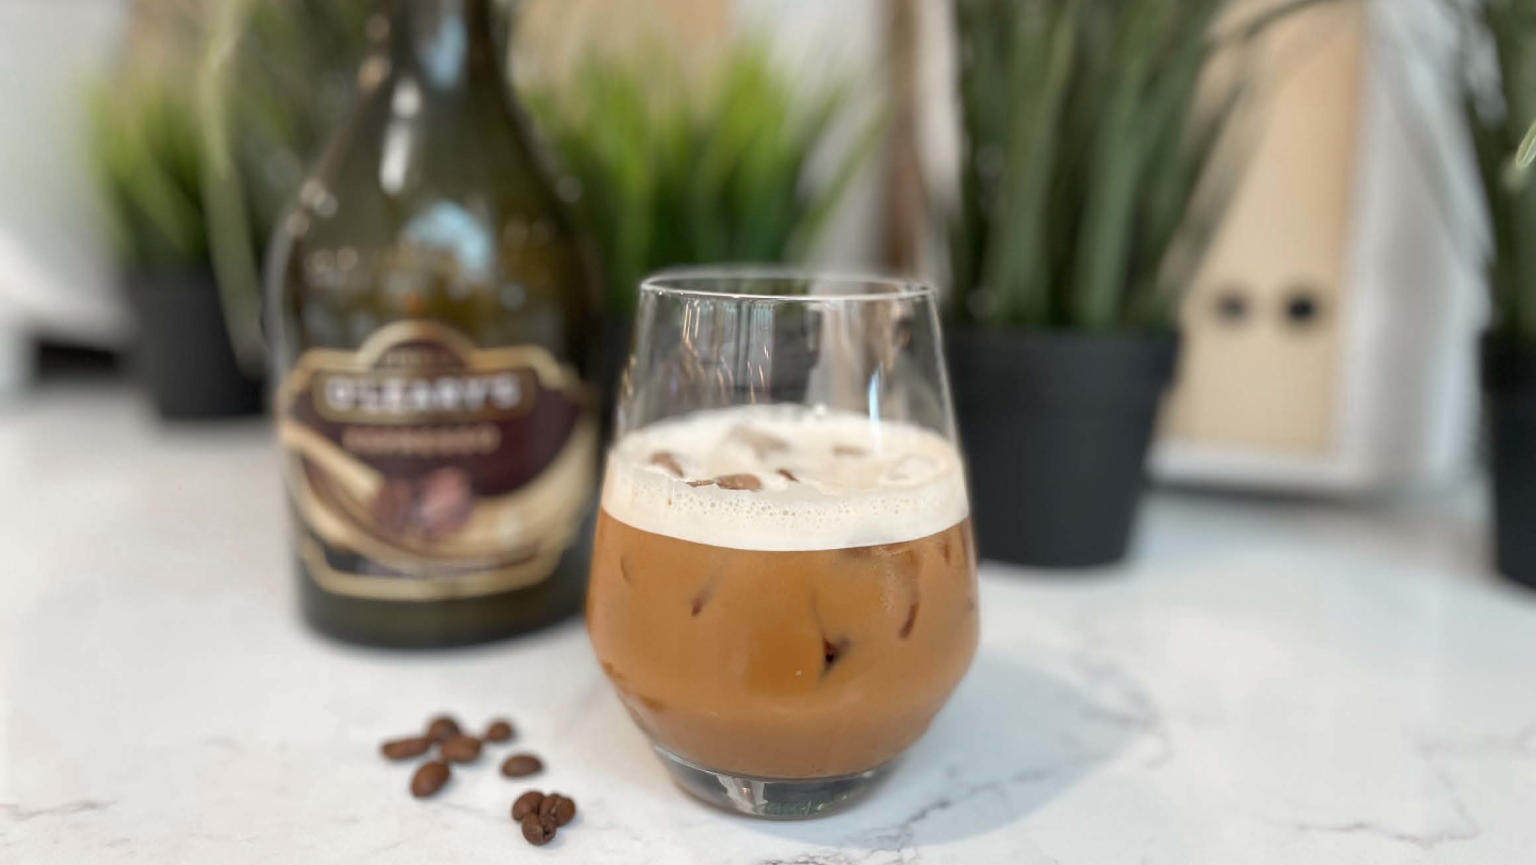 A delectable brown cocktail served in a short round glass, adorned with froth and accompanied by ice. Adjacent to it, a scattering of aromatic coffee beans adds an enticing touch. In the background, a dark bottle and black potted plants create a sophisticated ambience.